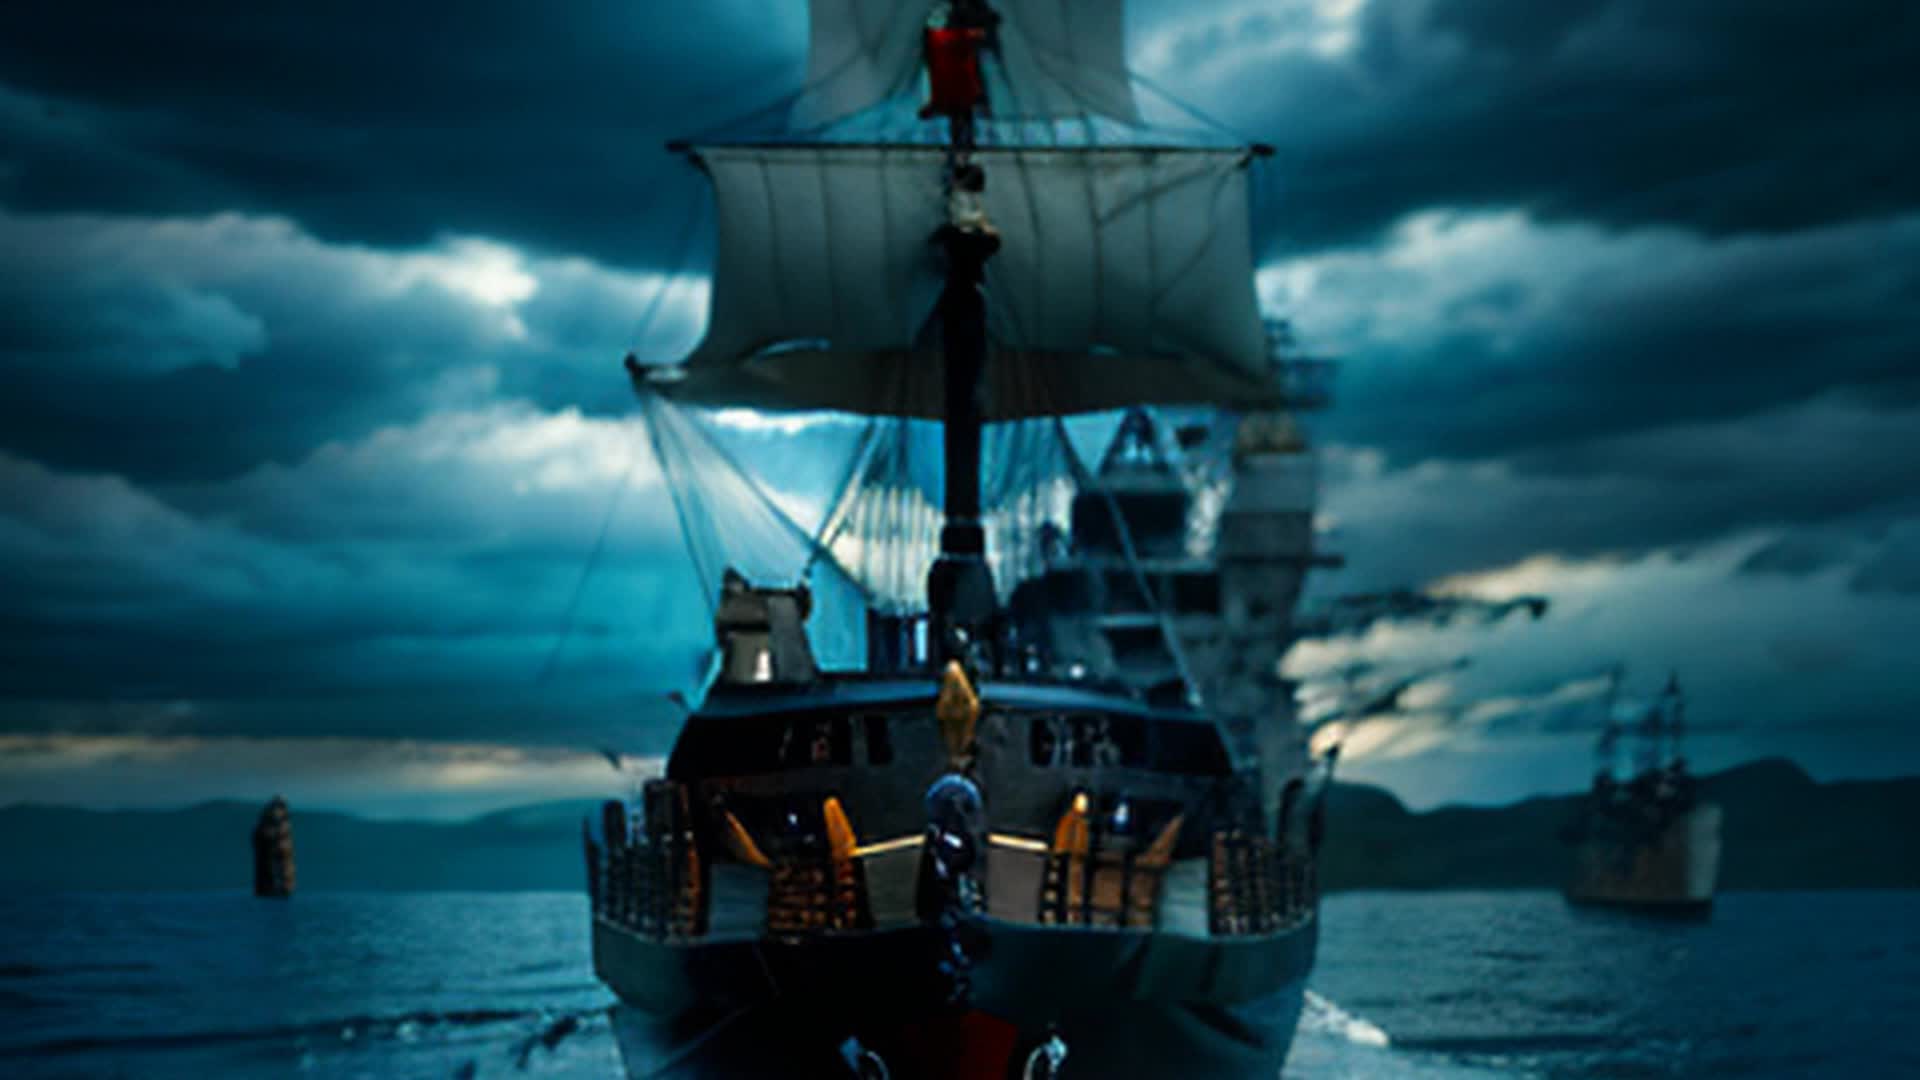 Ancient galleon, massive challenging waves, navigating open sea, stormy weather, dark clouds, turbulent waters, ship creaking, wooden hull, tattered sails, dramatic seascape, intense action, high definition, cinematic lighting, gloomy atmosphere, epic adventure, dynamic camera angles, rendered by octane